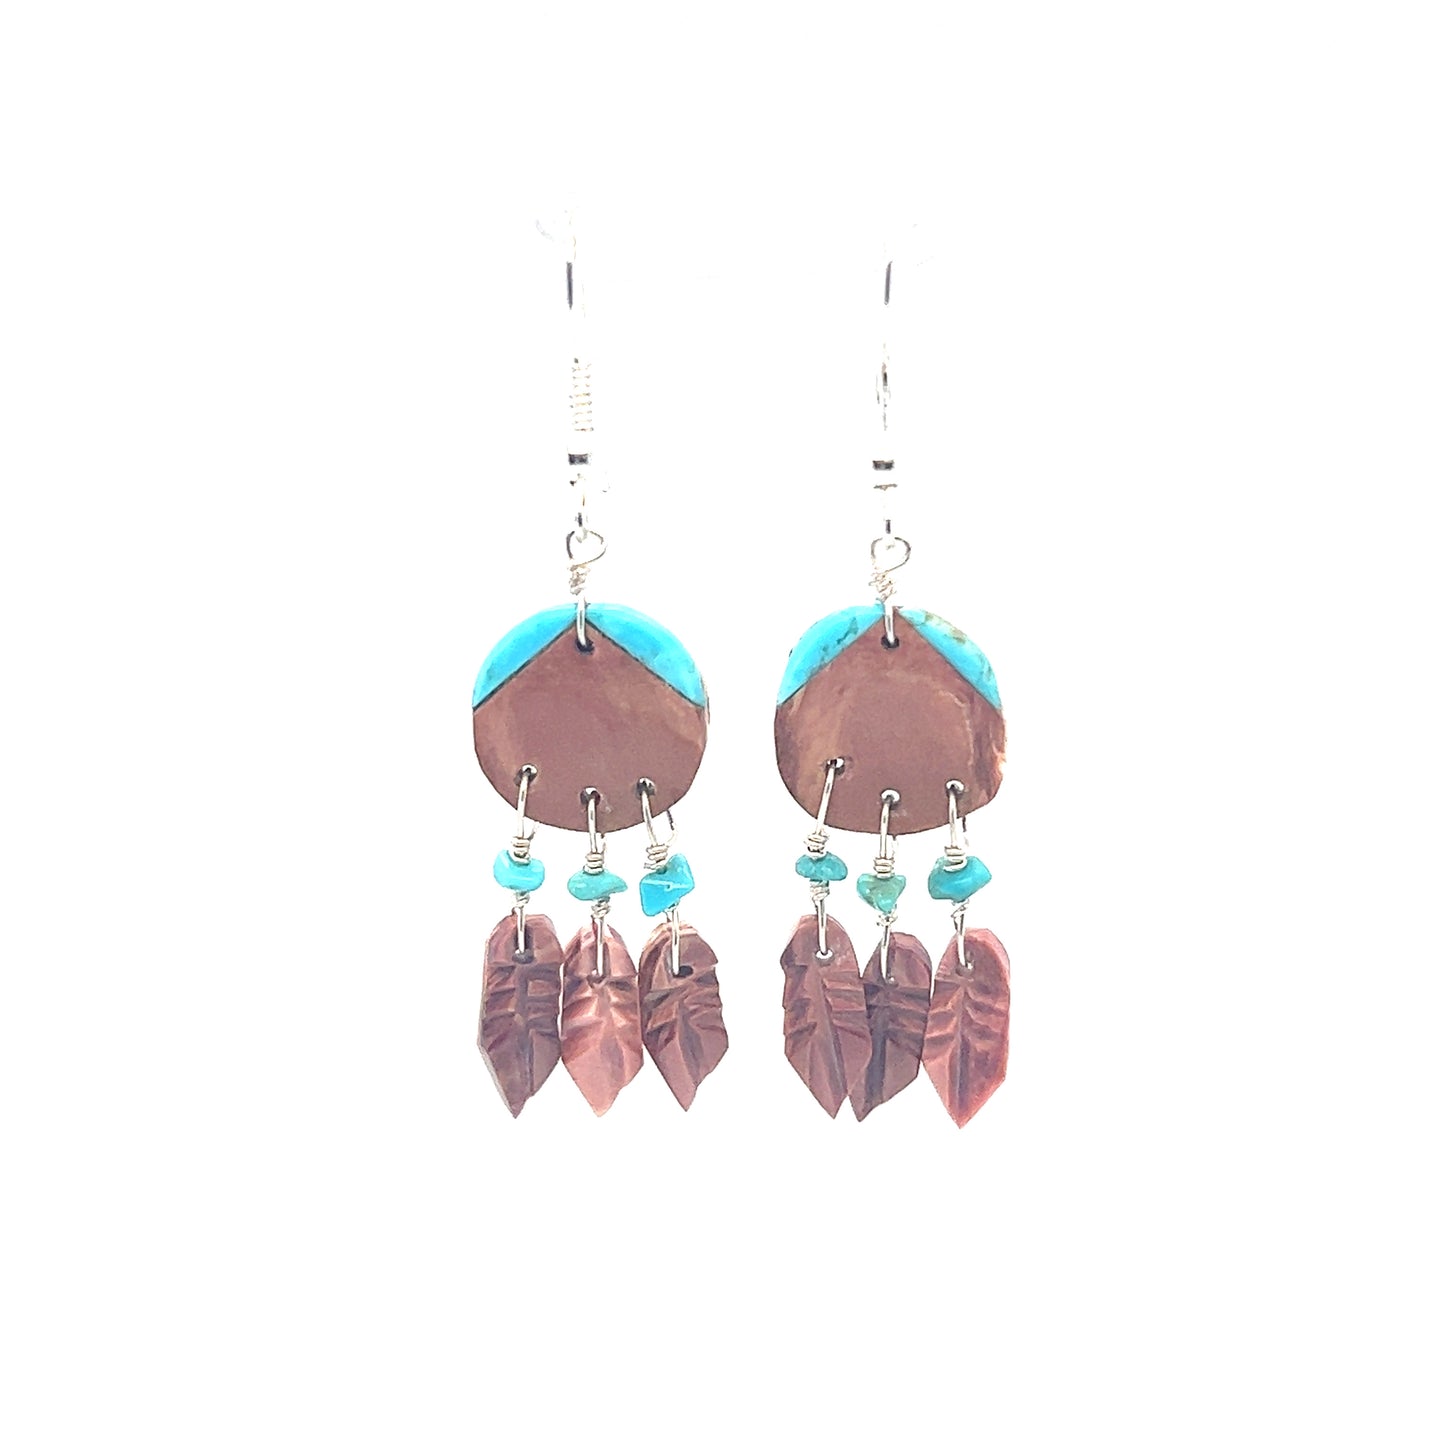 
                  
                    A pair of Handmade Earrings with 3 Small Stone Feathers adorned with feathers, reflecting the artistry of Native American culture by Super Silver.
                  
                